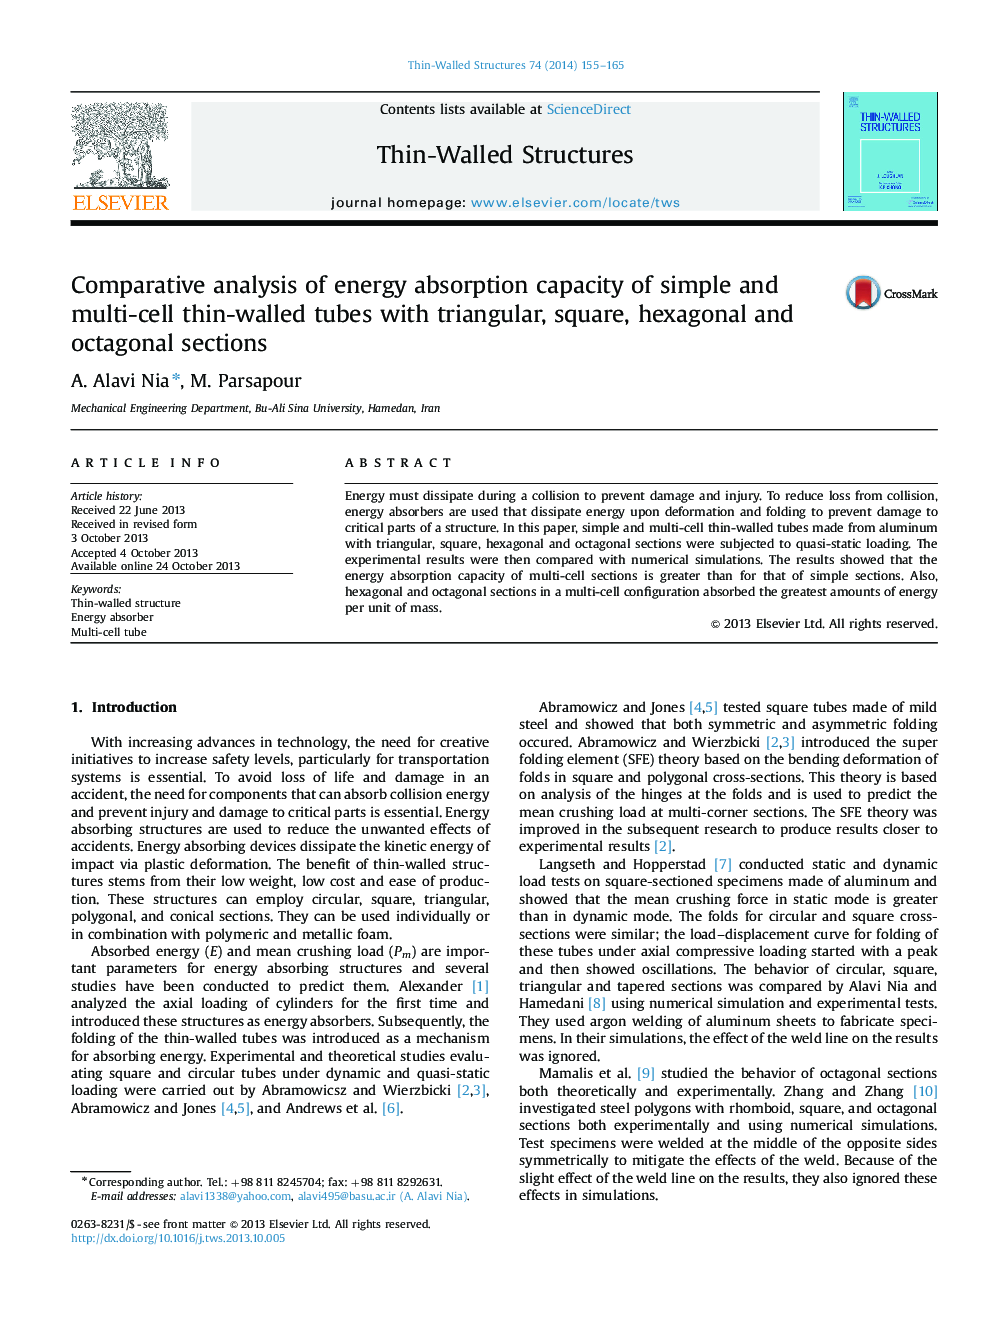 Comparative analysis of energy absorption capacity of simple and multi-cell thin-walled tubes with triangular, square, hexagonal and octagonal sections